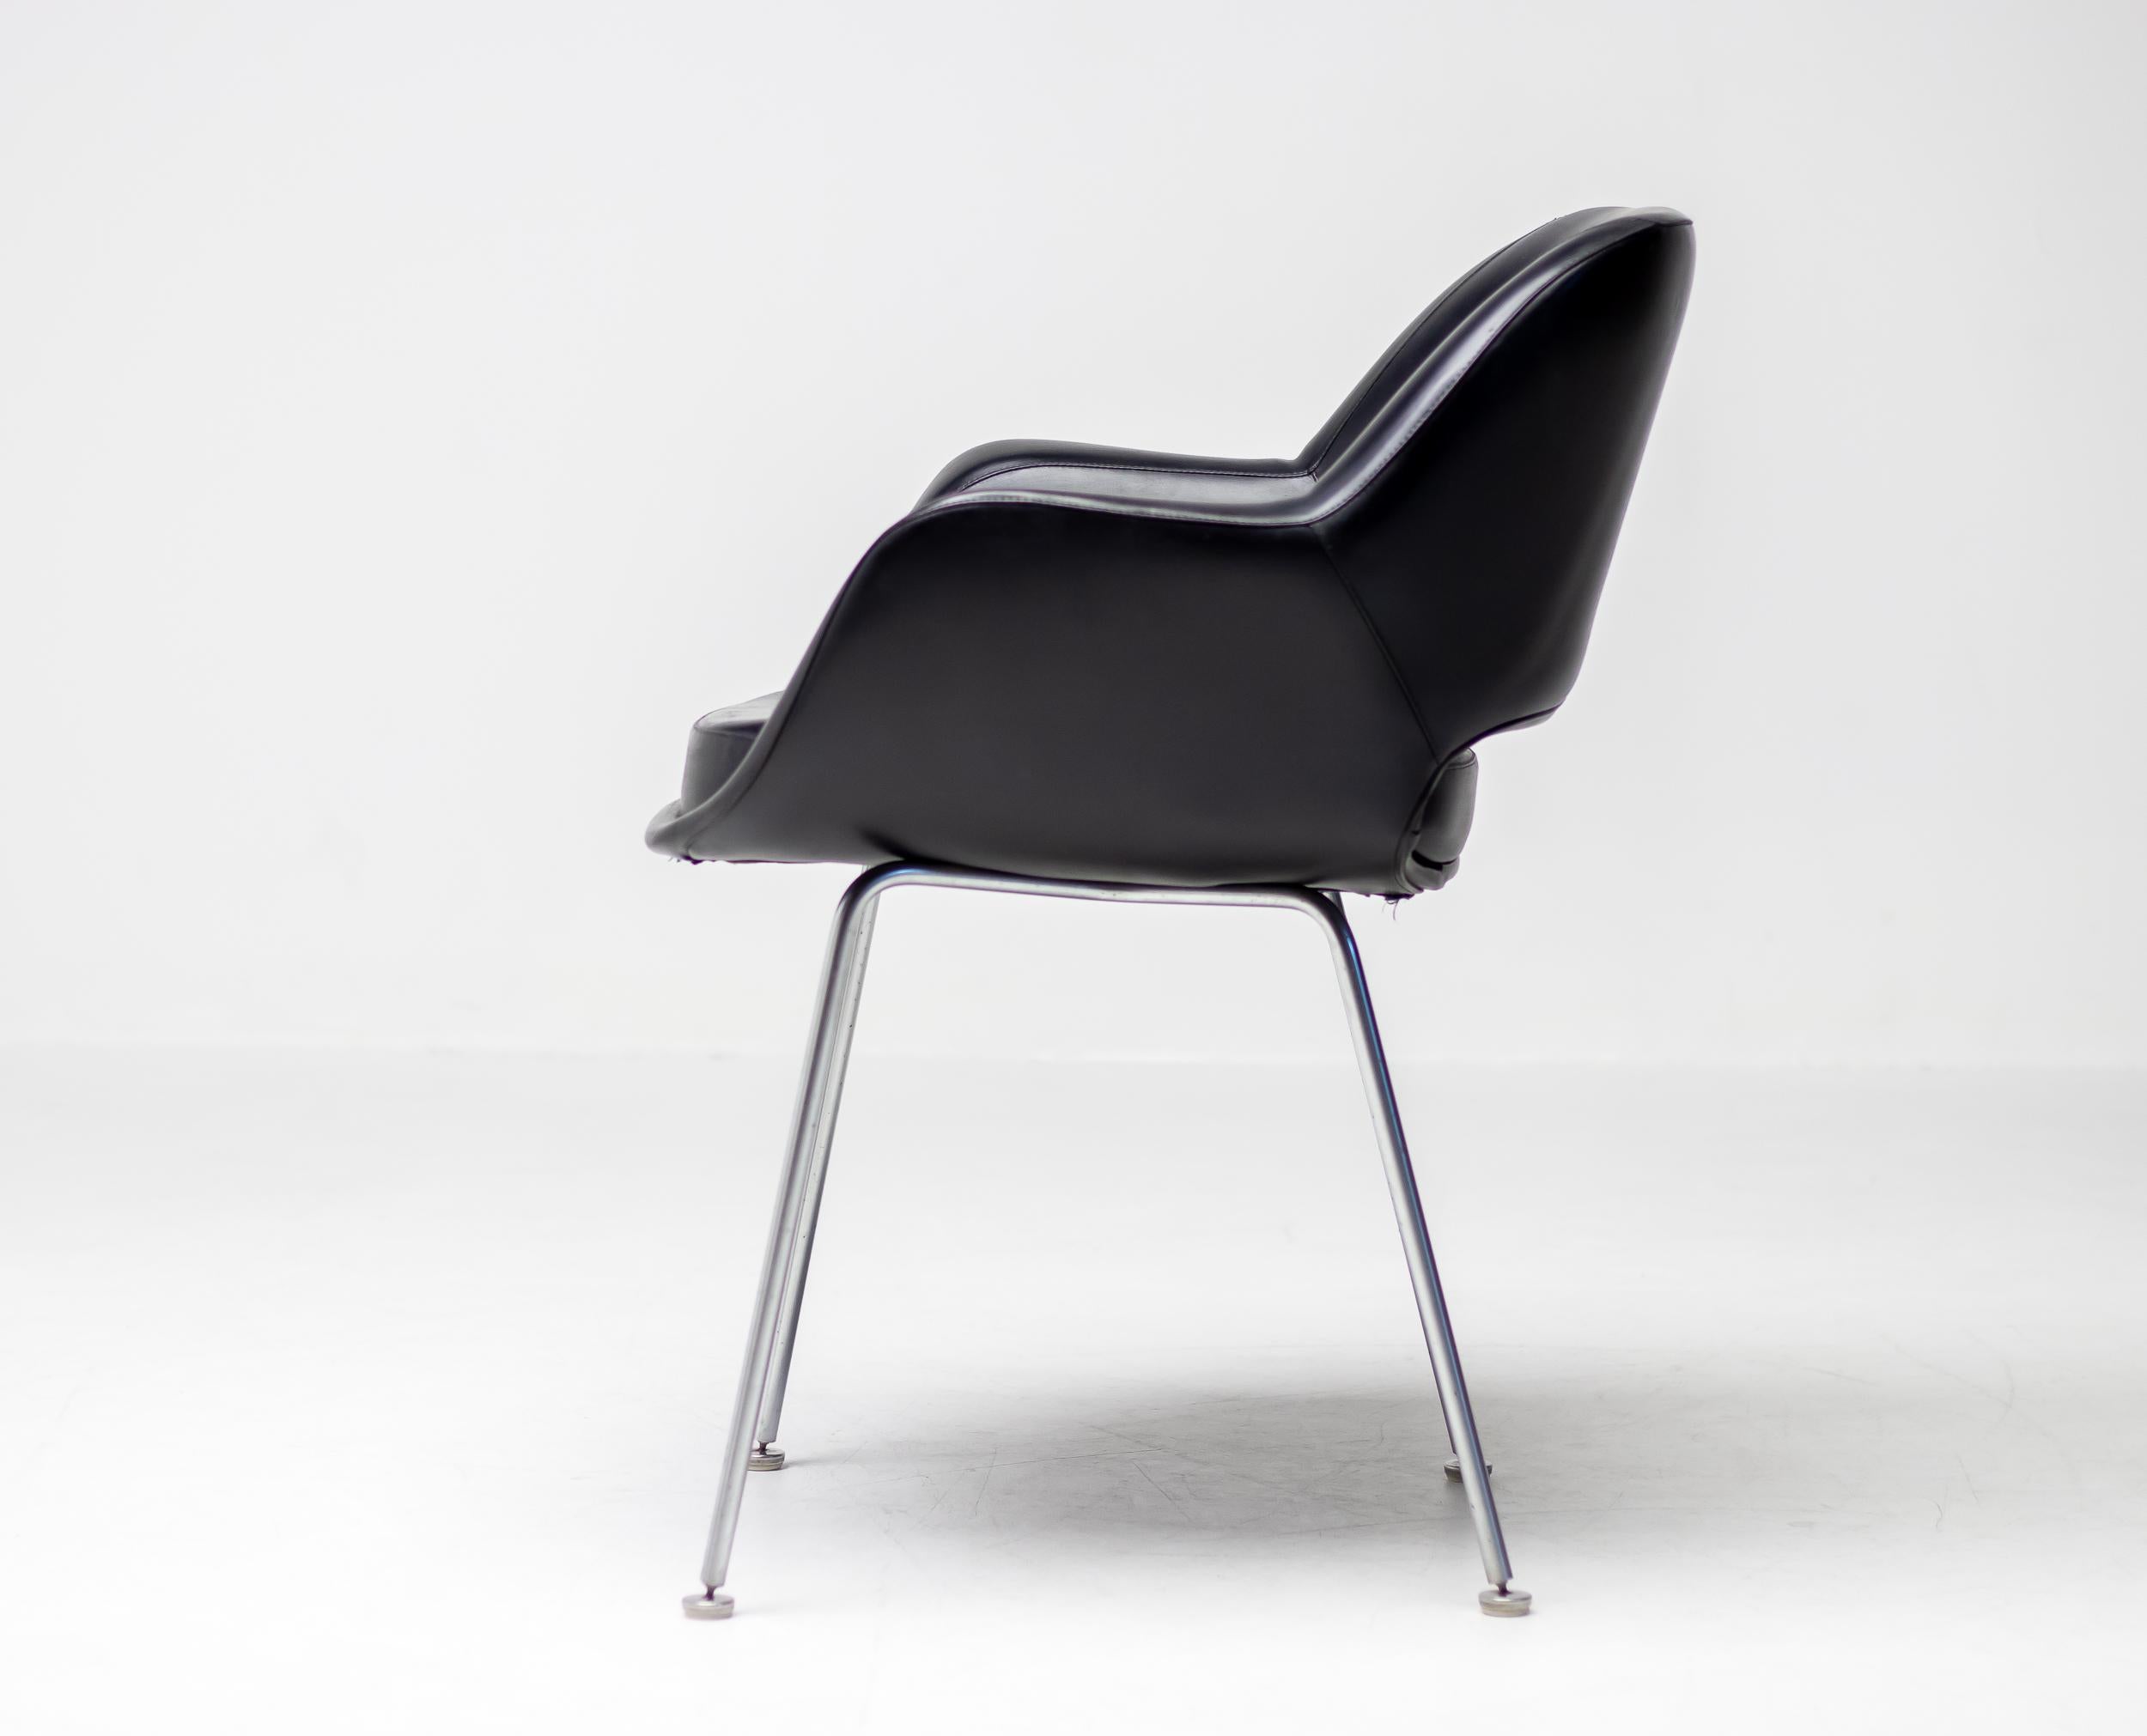 Mid-20th Century Kilta Chair by Olli Mannermaa  For Sale